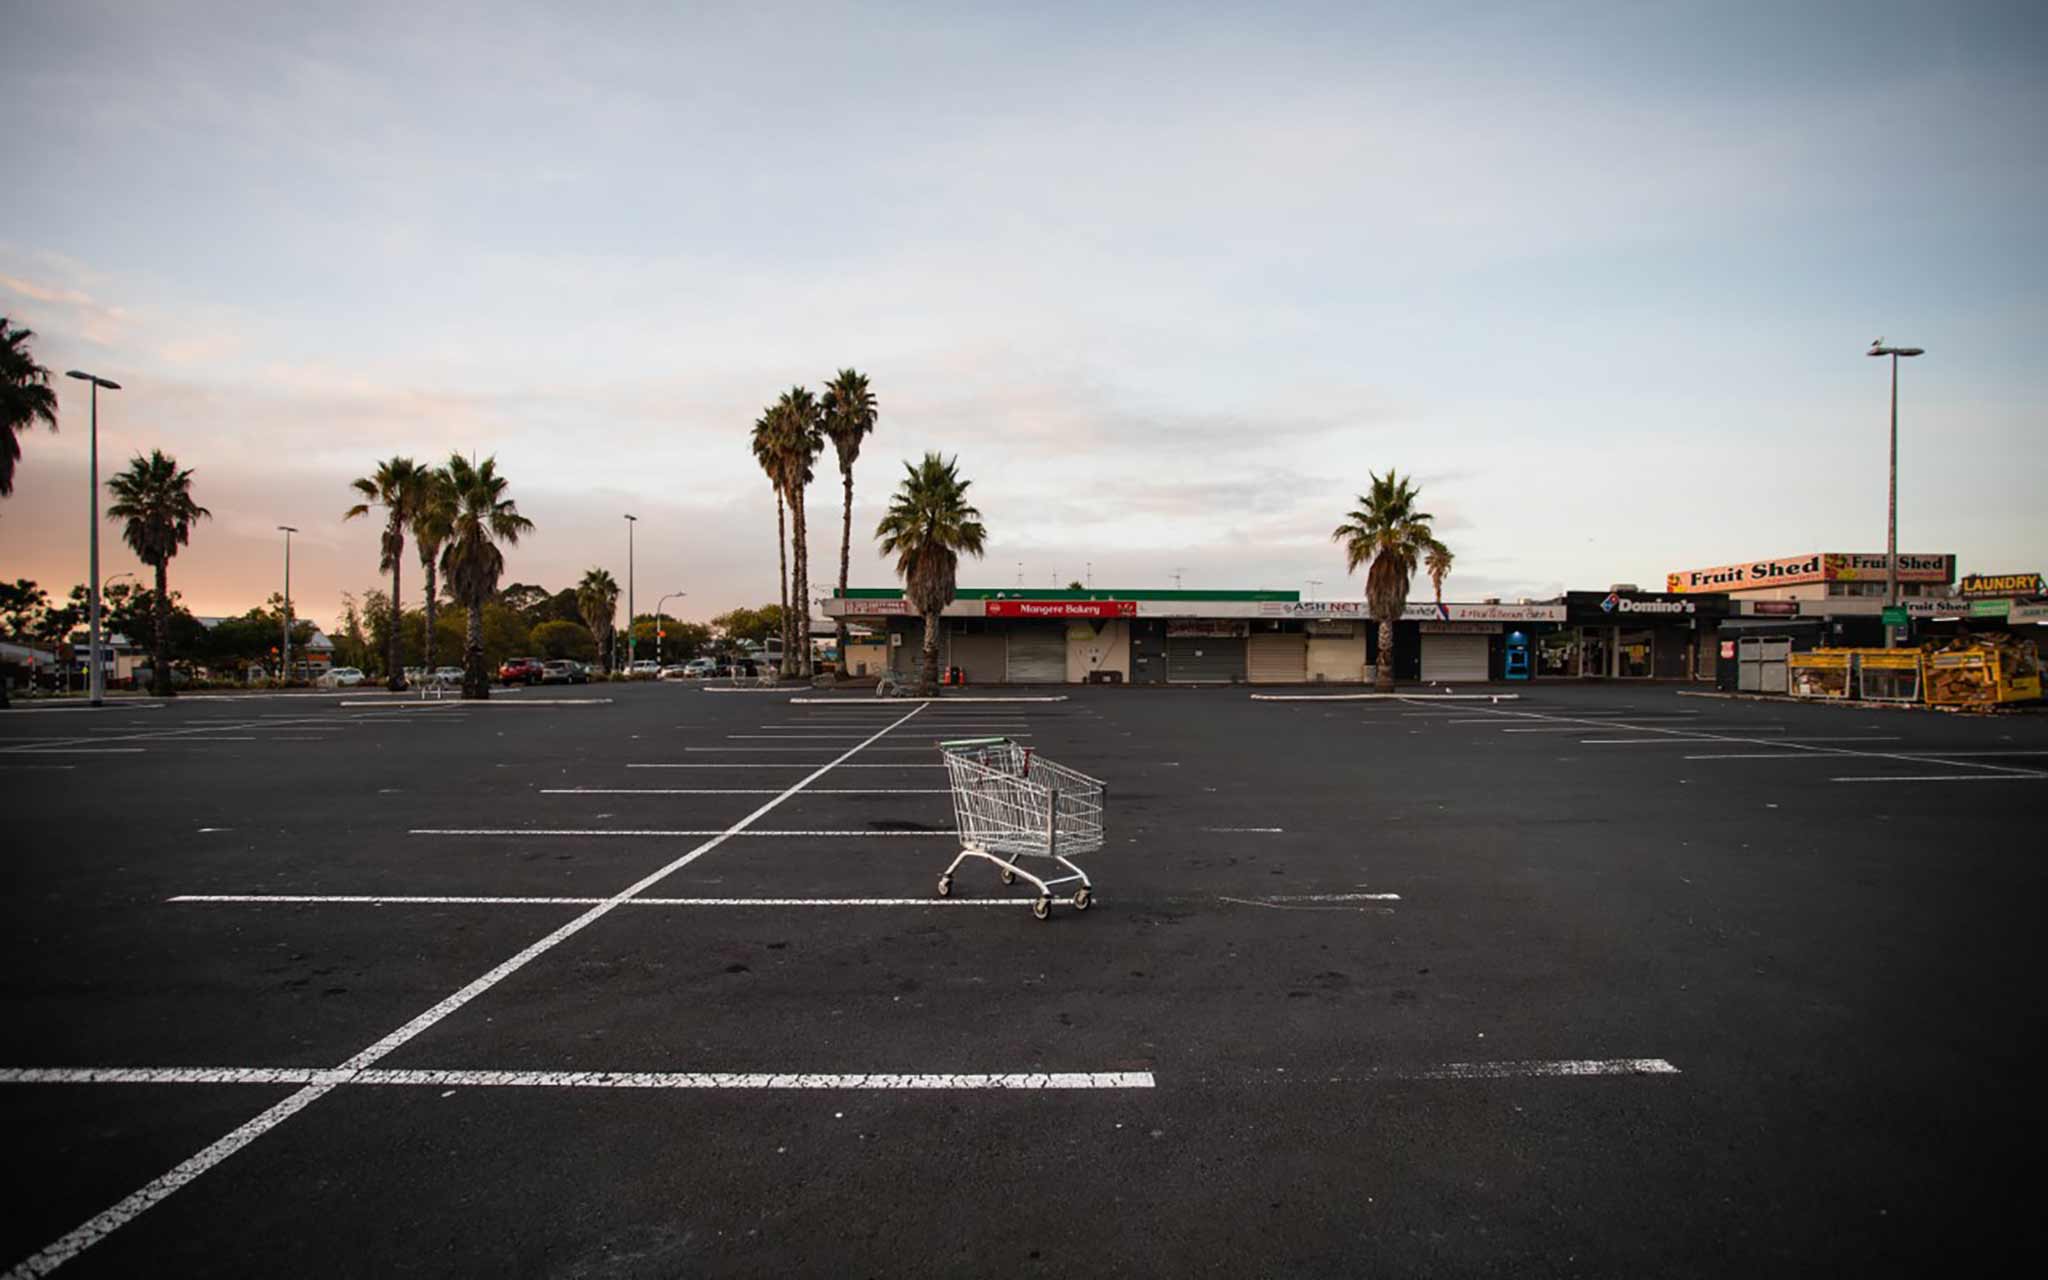 Photo of an empty car park with a sole shopping trolley in the middle.